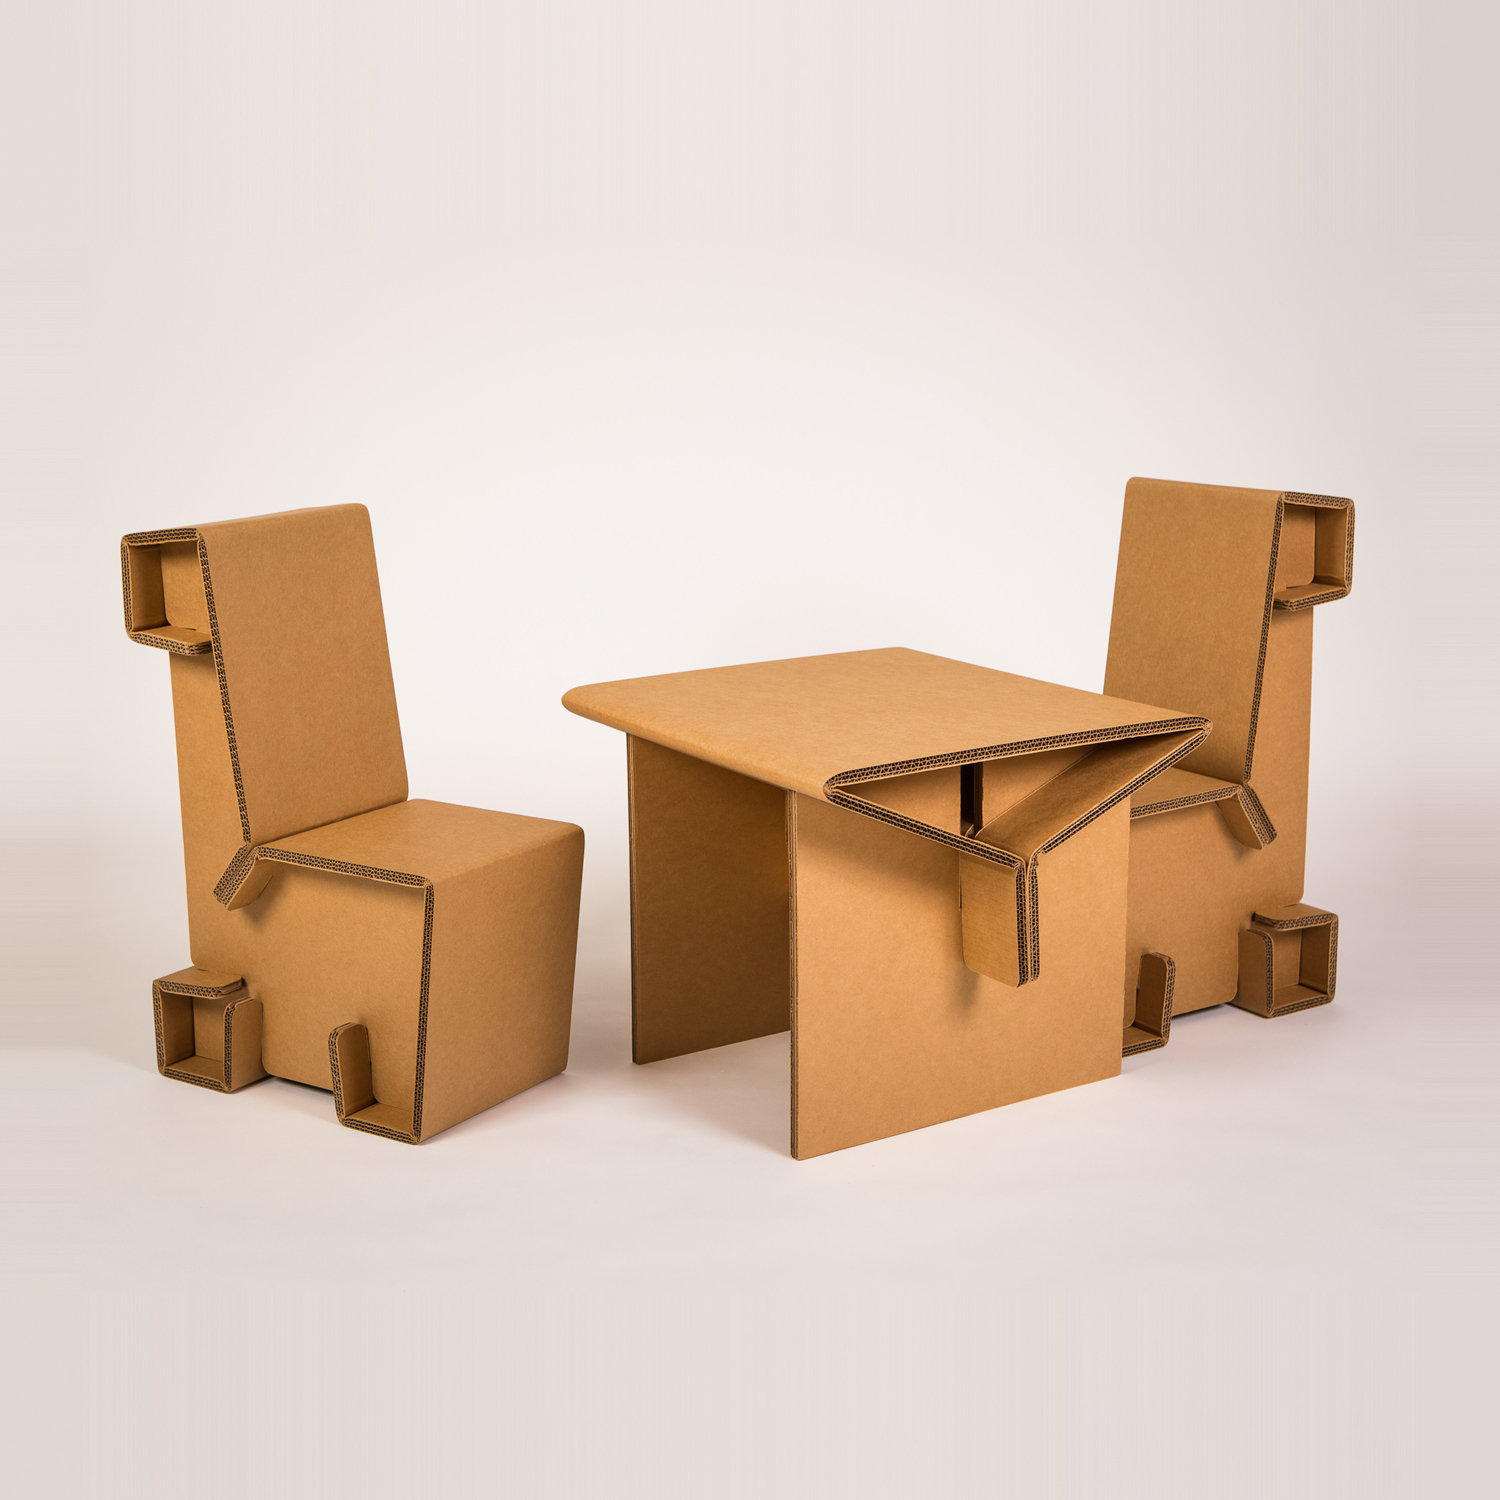 Cardboard furniture two chairs and a table